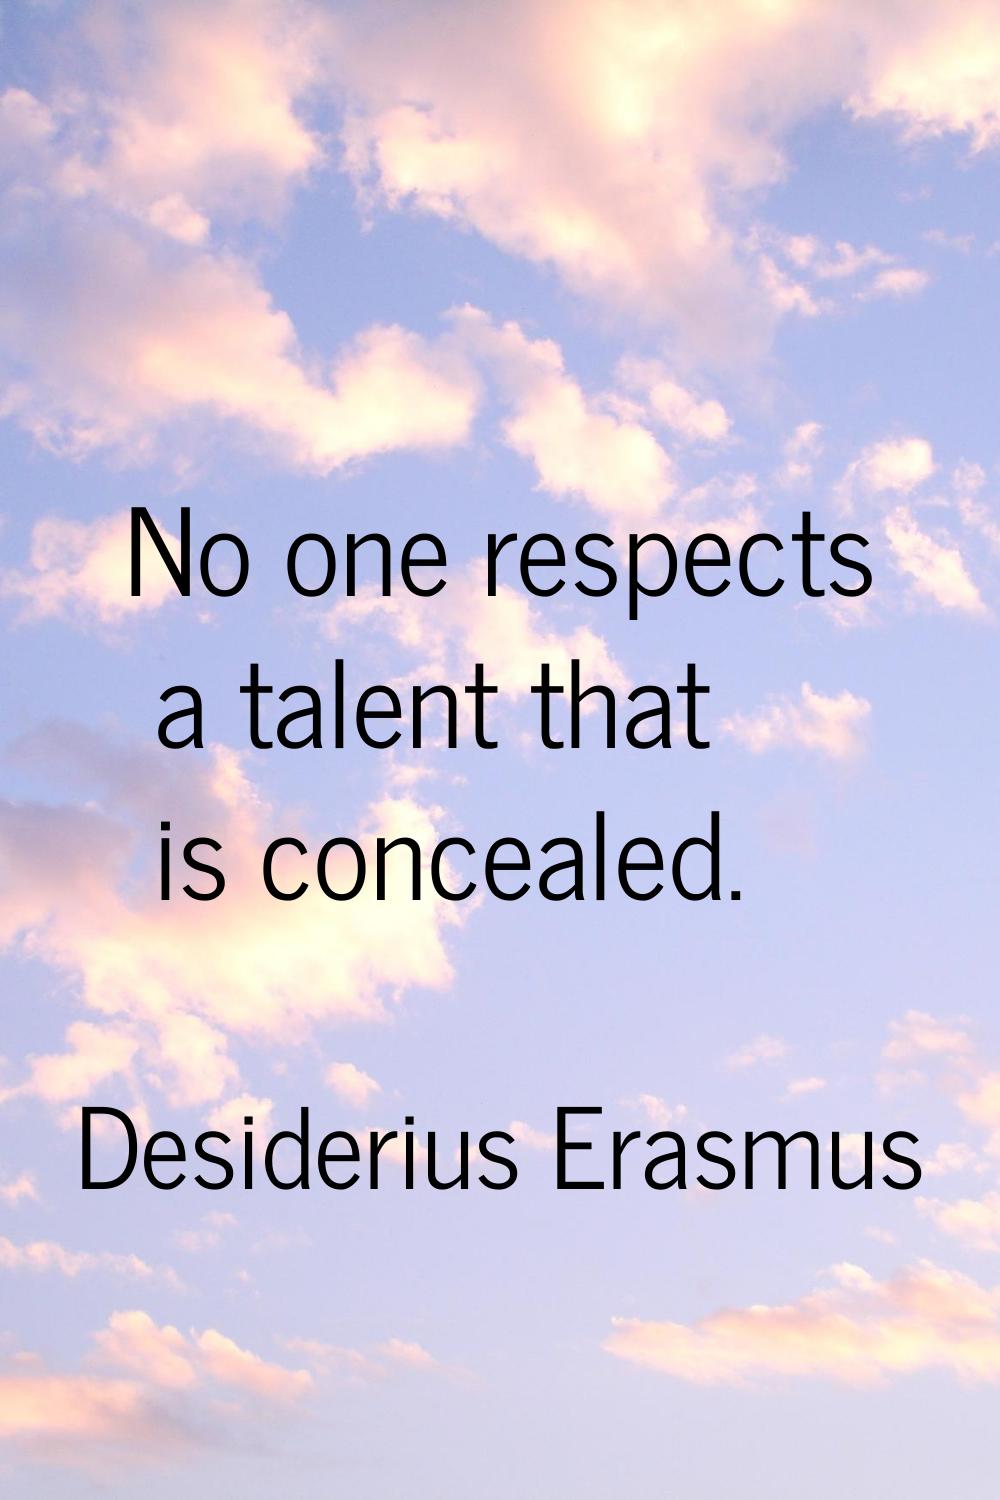 No one respects a talent that is concealed.